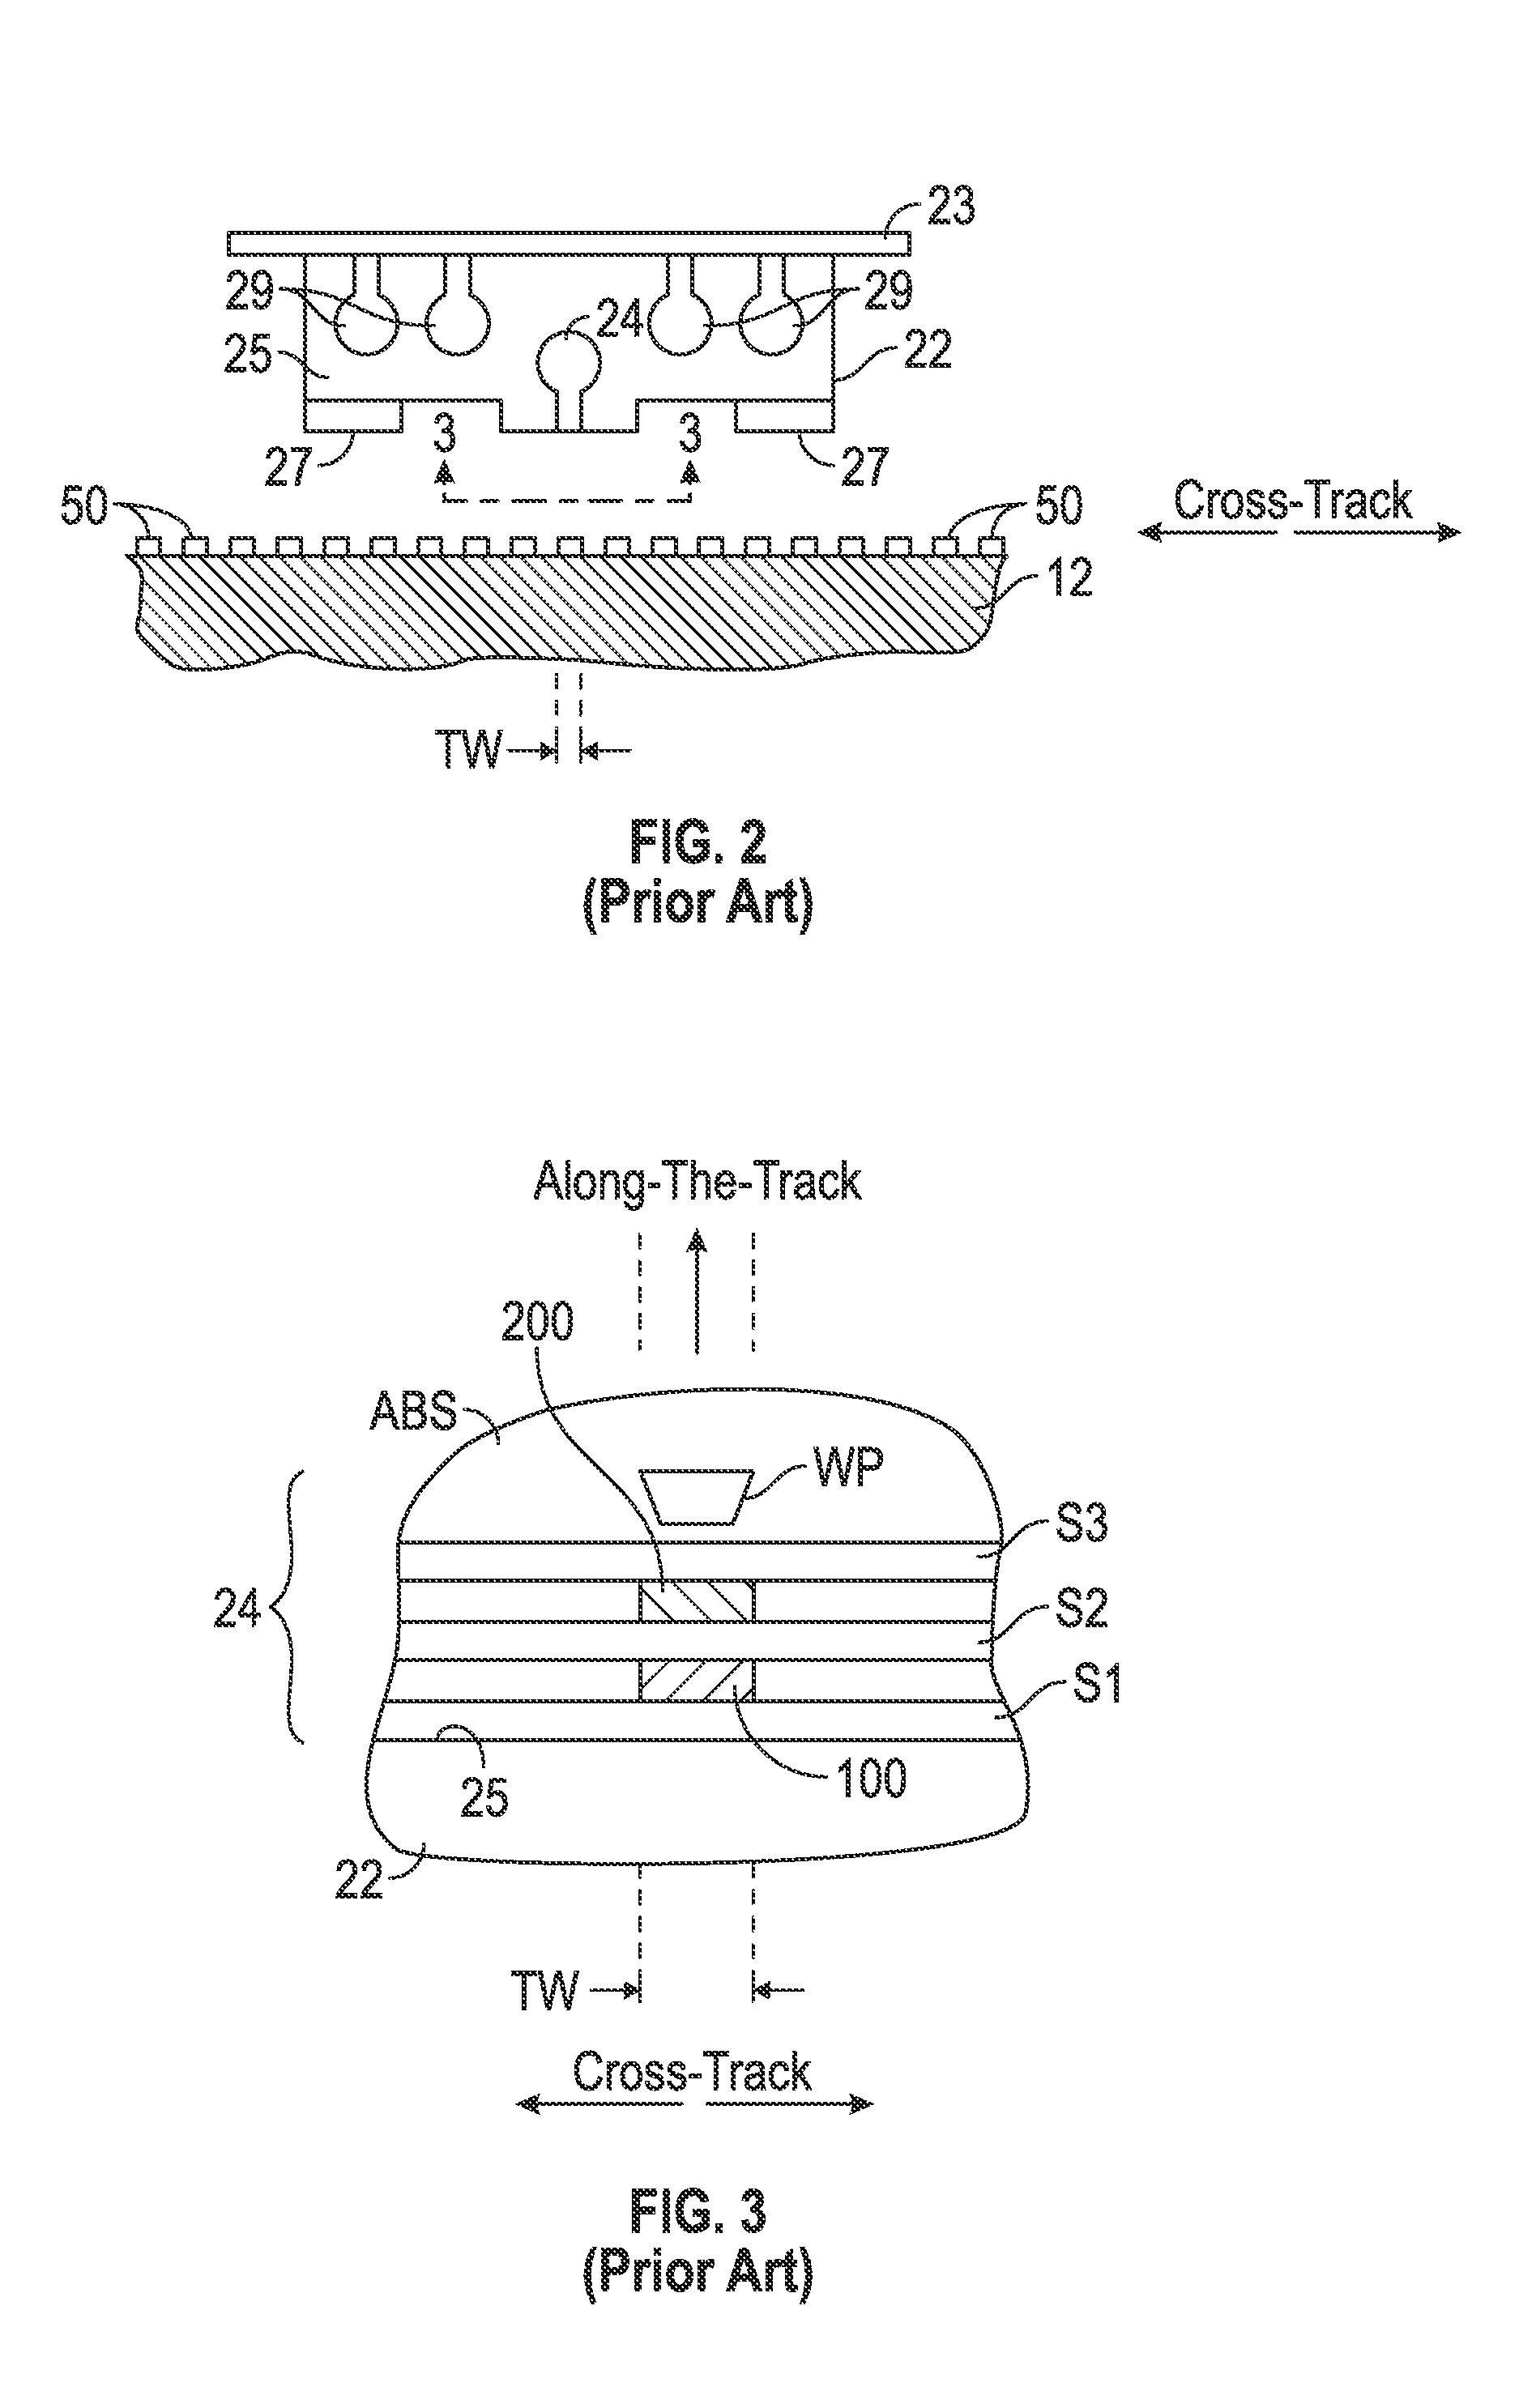 Current-perpendicular-to-the-plane (CPP) magnetoresistive (MR) sensor structure with multiple stacked sensors and center shield with CoFeB insertion layer